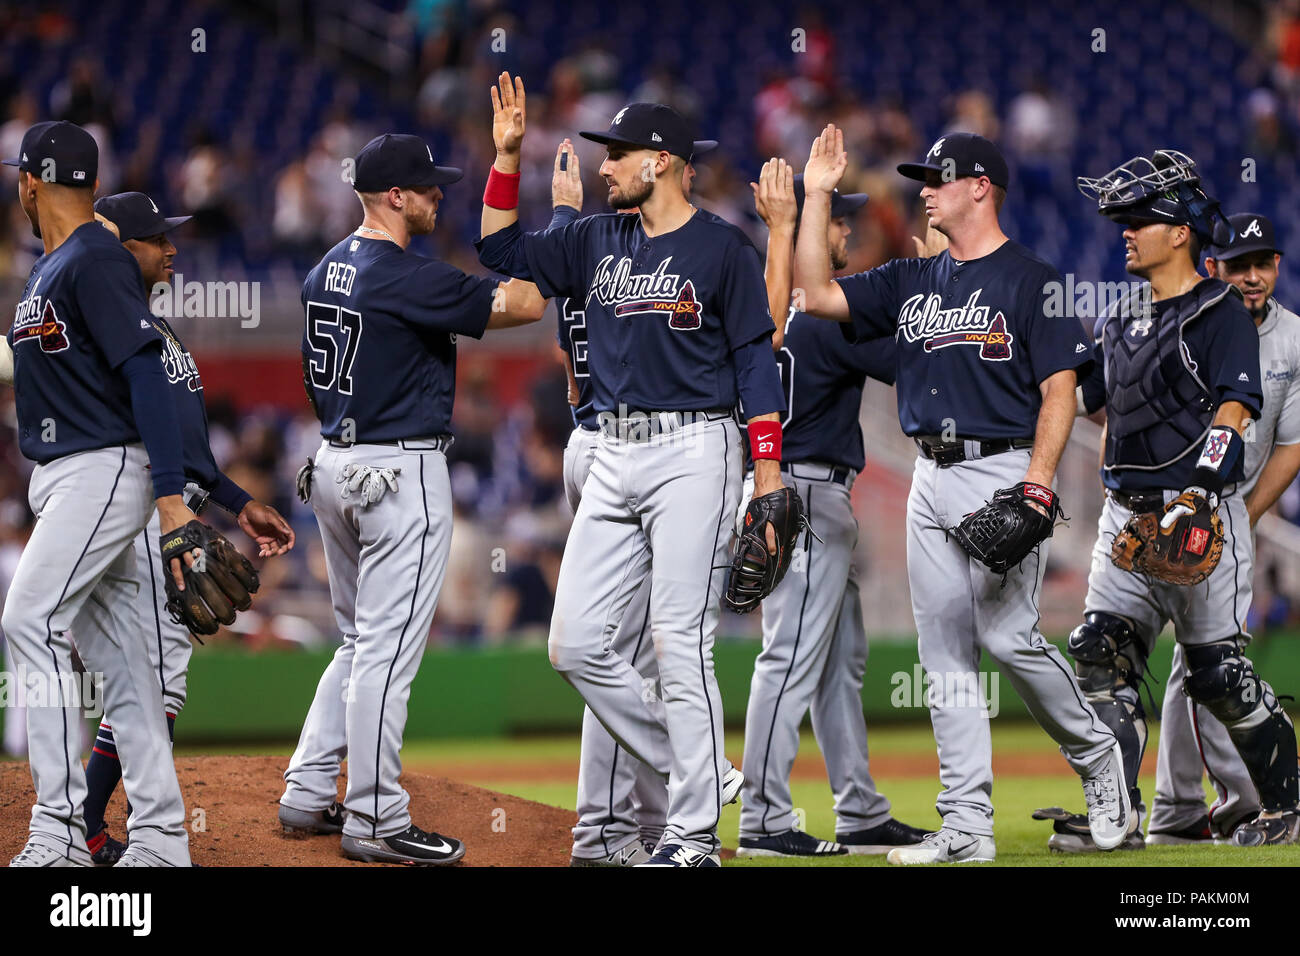 Miami, Florida, USA. 23rd July, 2018. The Atlanta Braves celebrate their team's victory of an MLB game against the Miami Marlins at the Marlins Park, in Miami, Florida. The Braves won 12-1. Mario Houben/CSM/Alamy Live News Stock Photo